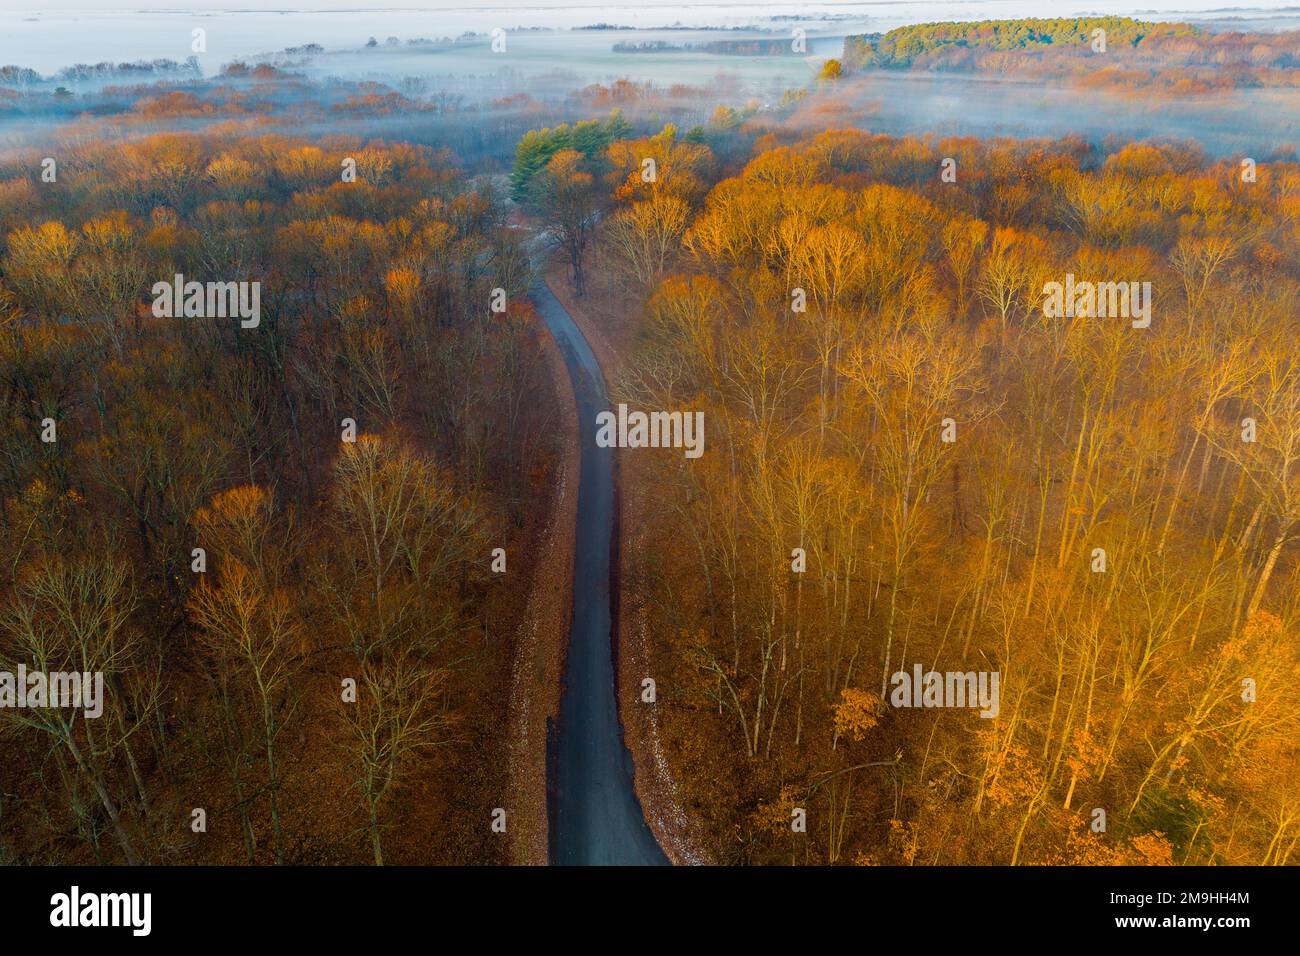 Aerial view of road through forest in autumn, Stephen A. Forbes State Park, Marion County, Illinois, USA Stock Photo